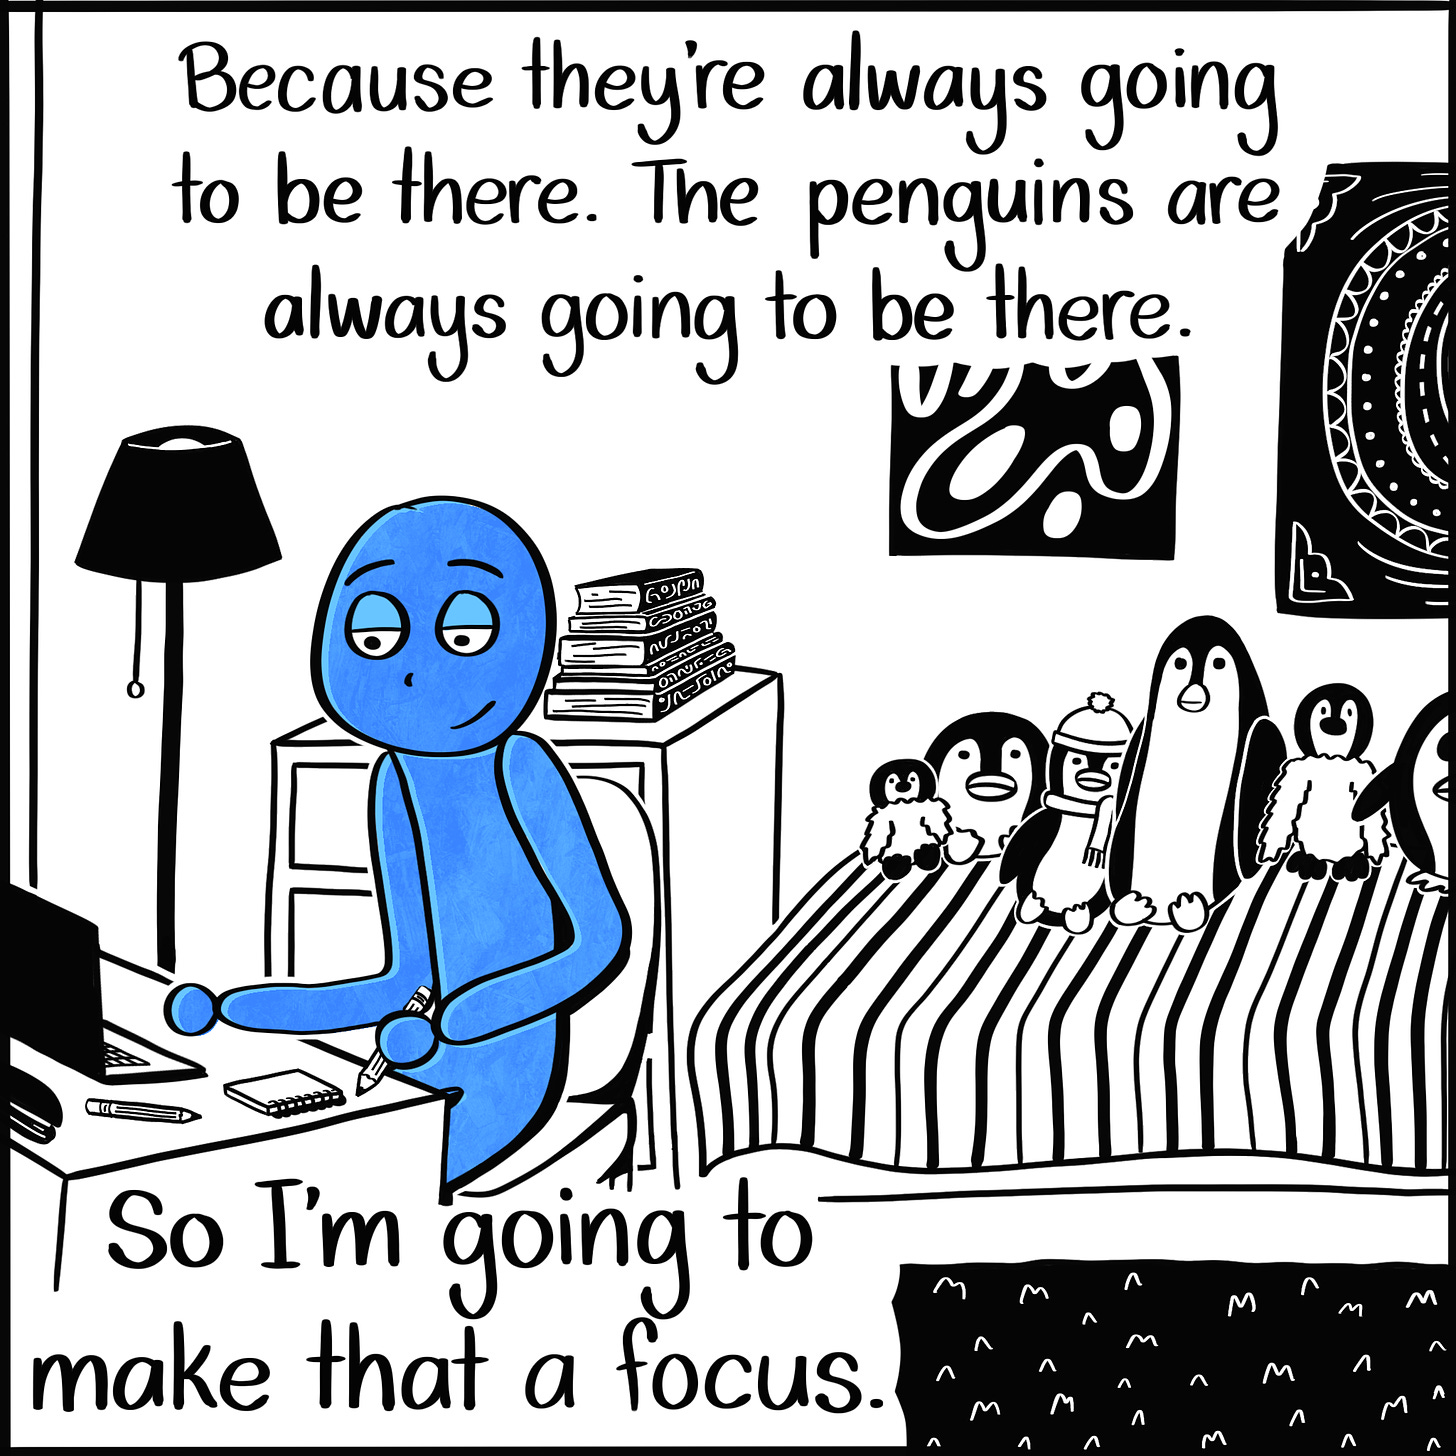 Caption: Because they're always going to be there. The penguins are always going to be there. So I'm going to make that a focus. Image: The blue person works at their desk, pencil in hand and a notebook and laptop in front of them. Behind them is their bed, with the penguins lined up.